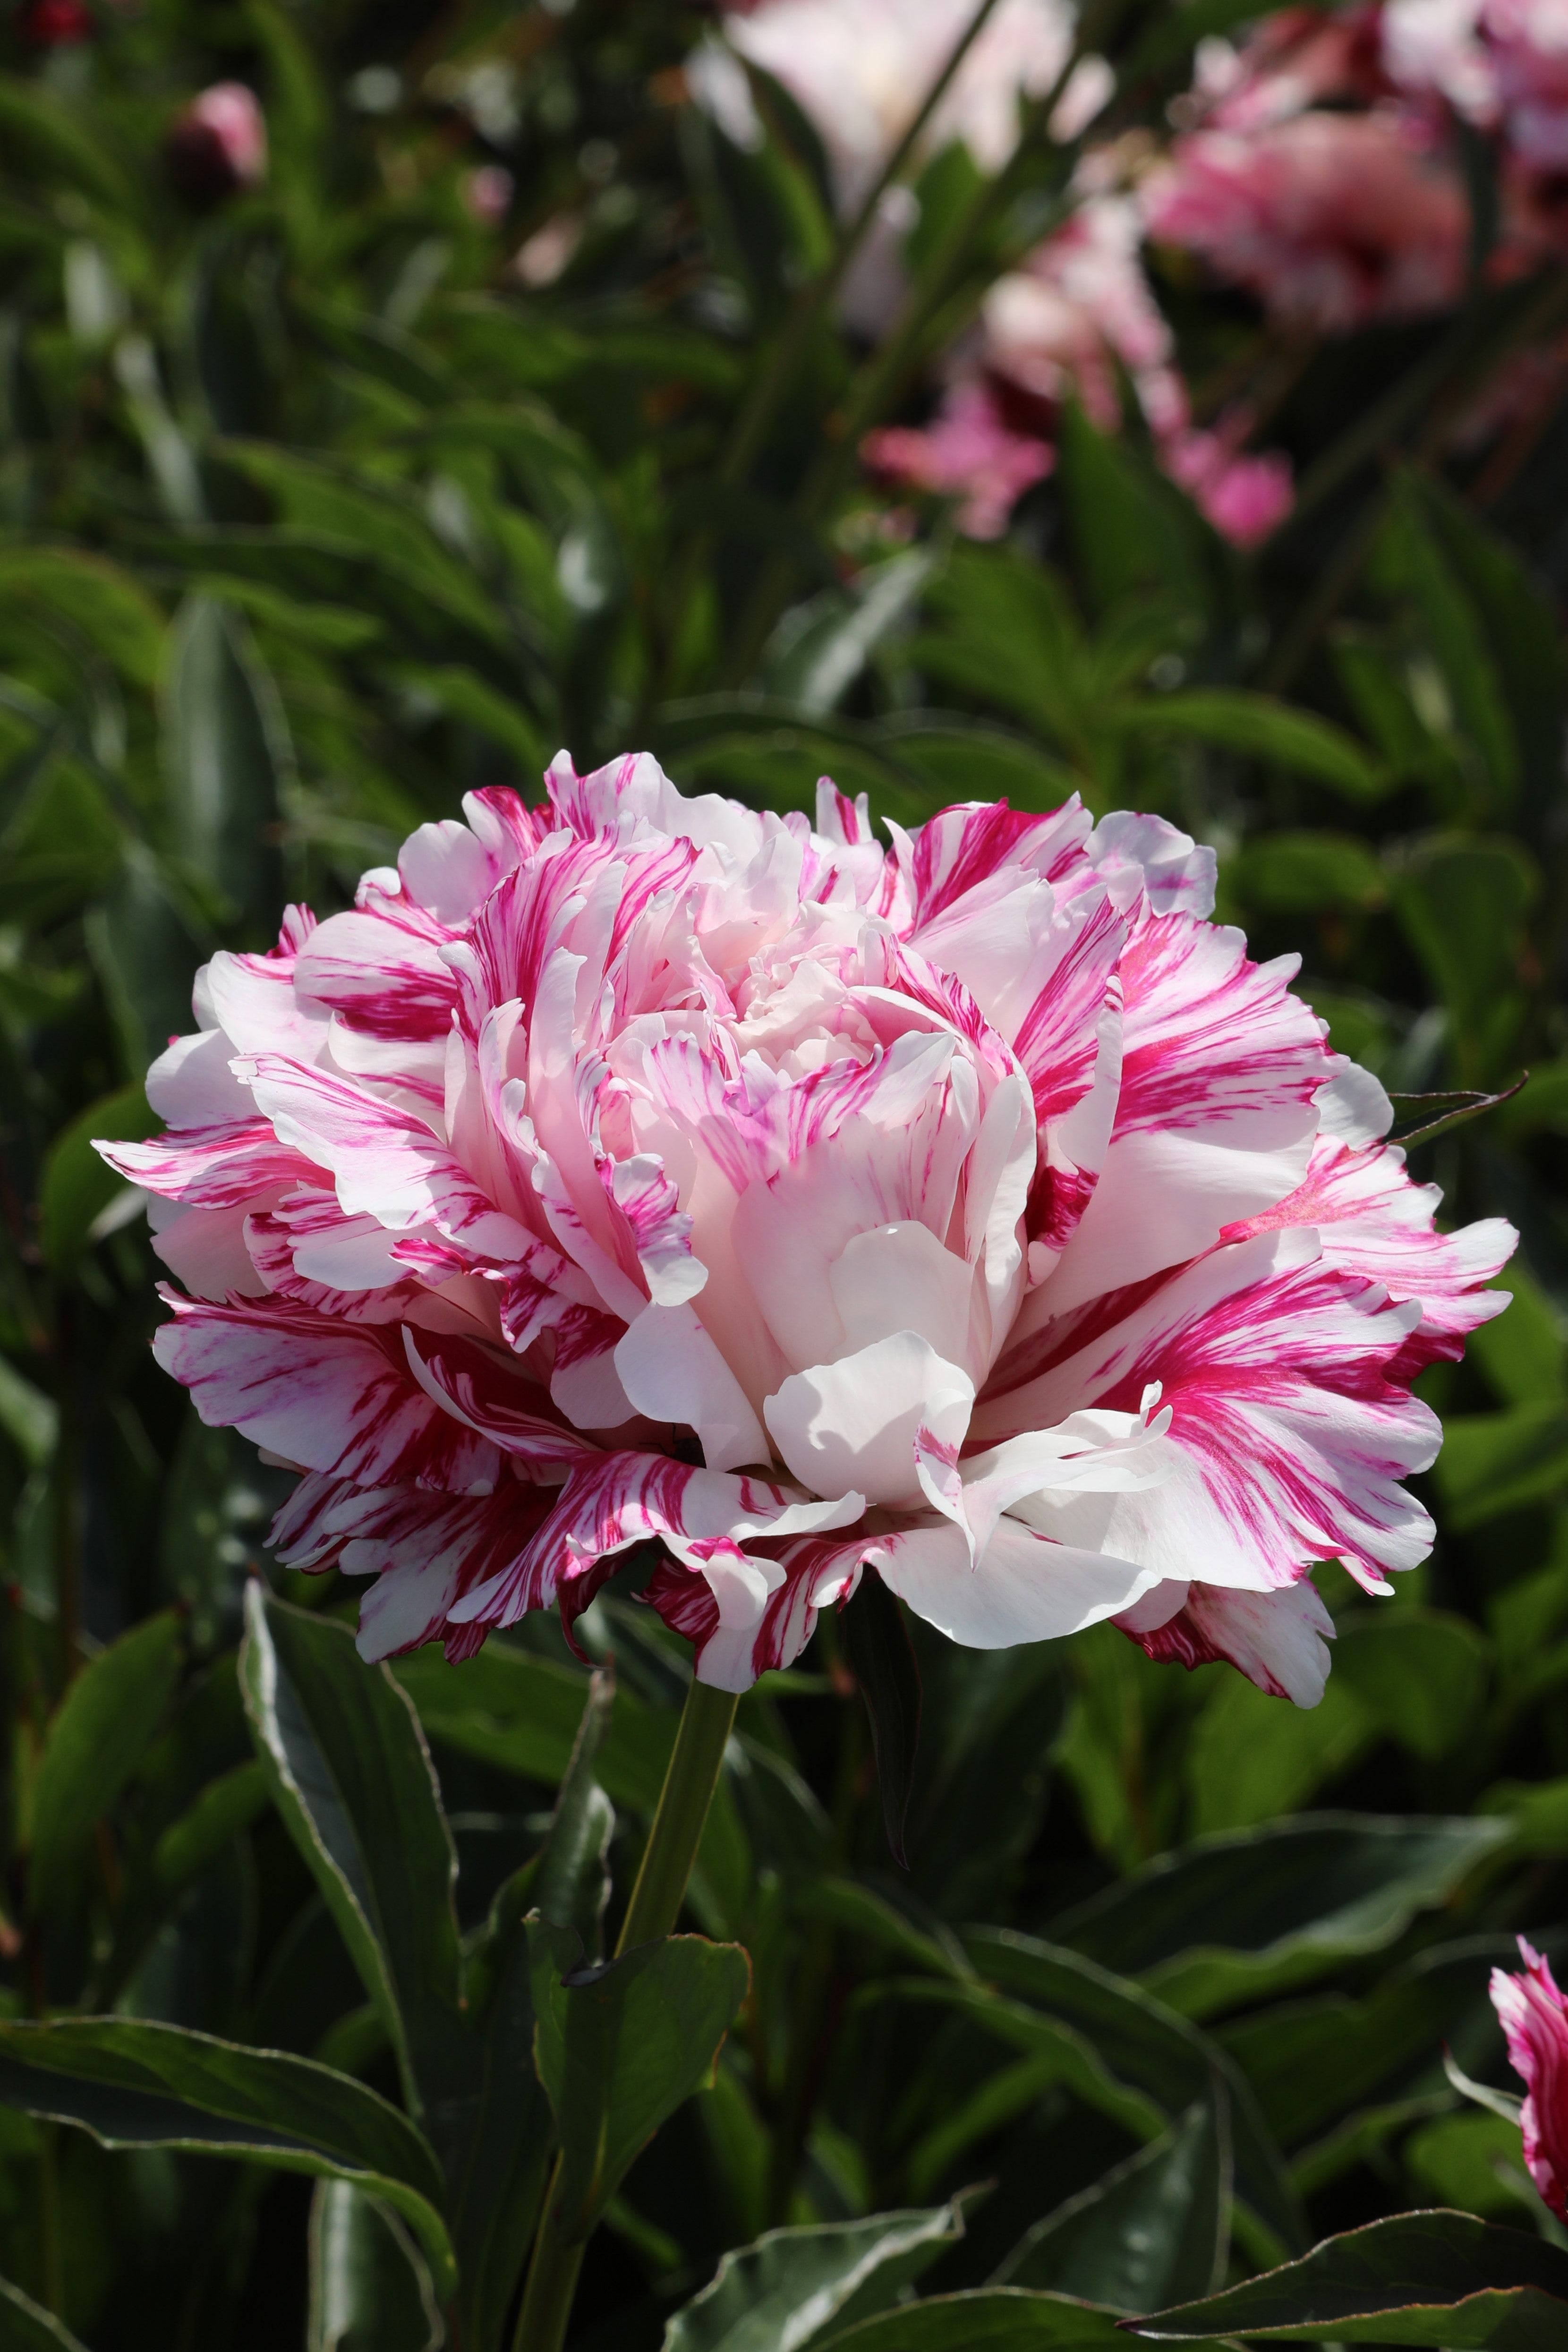 Captivating Pink with red Candy Stripe peony adds charm to floral landscapes